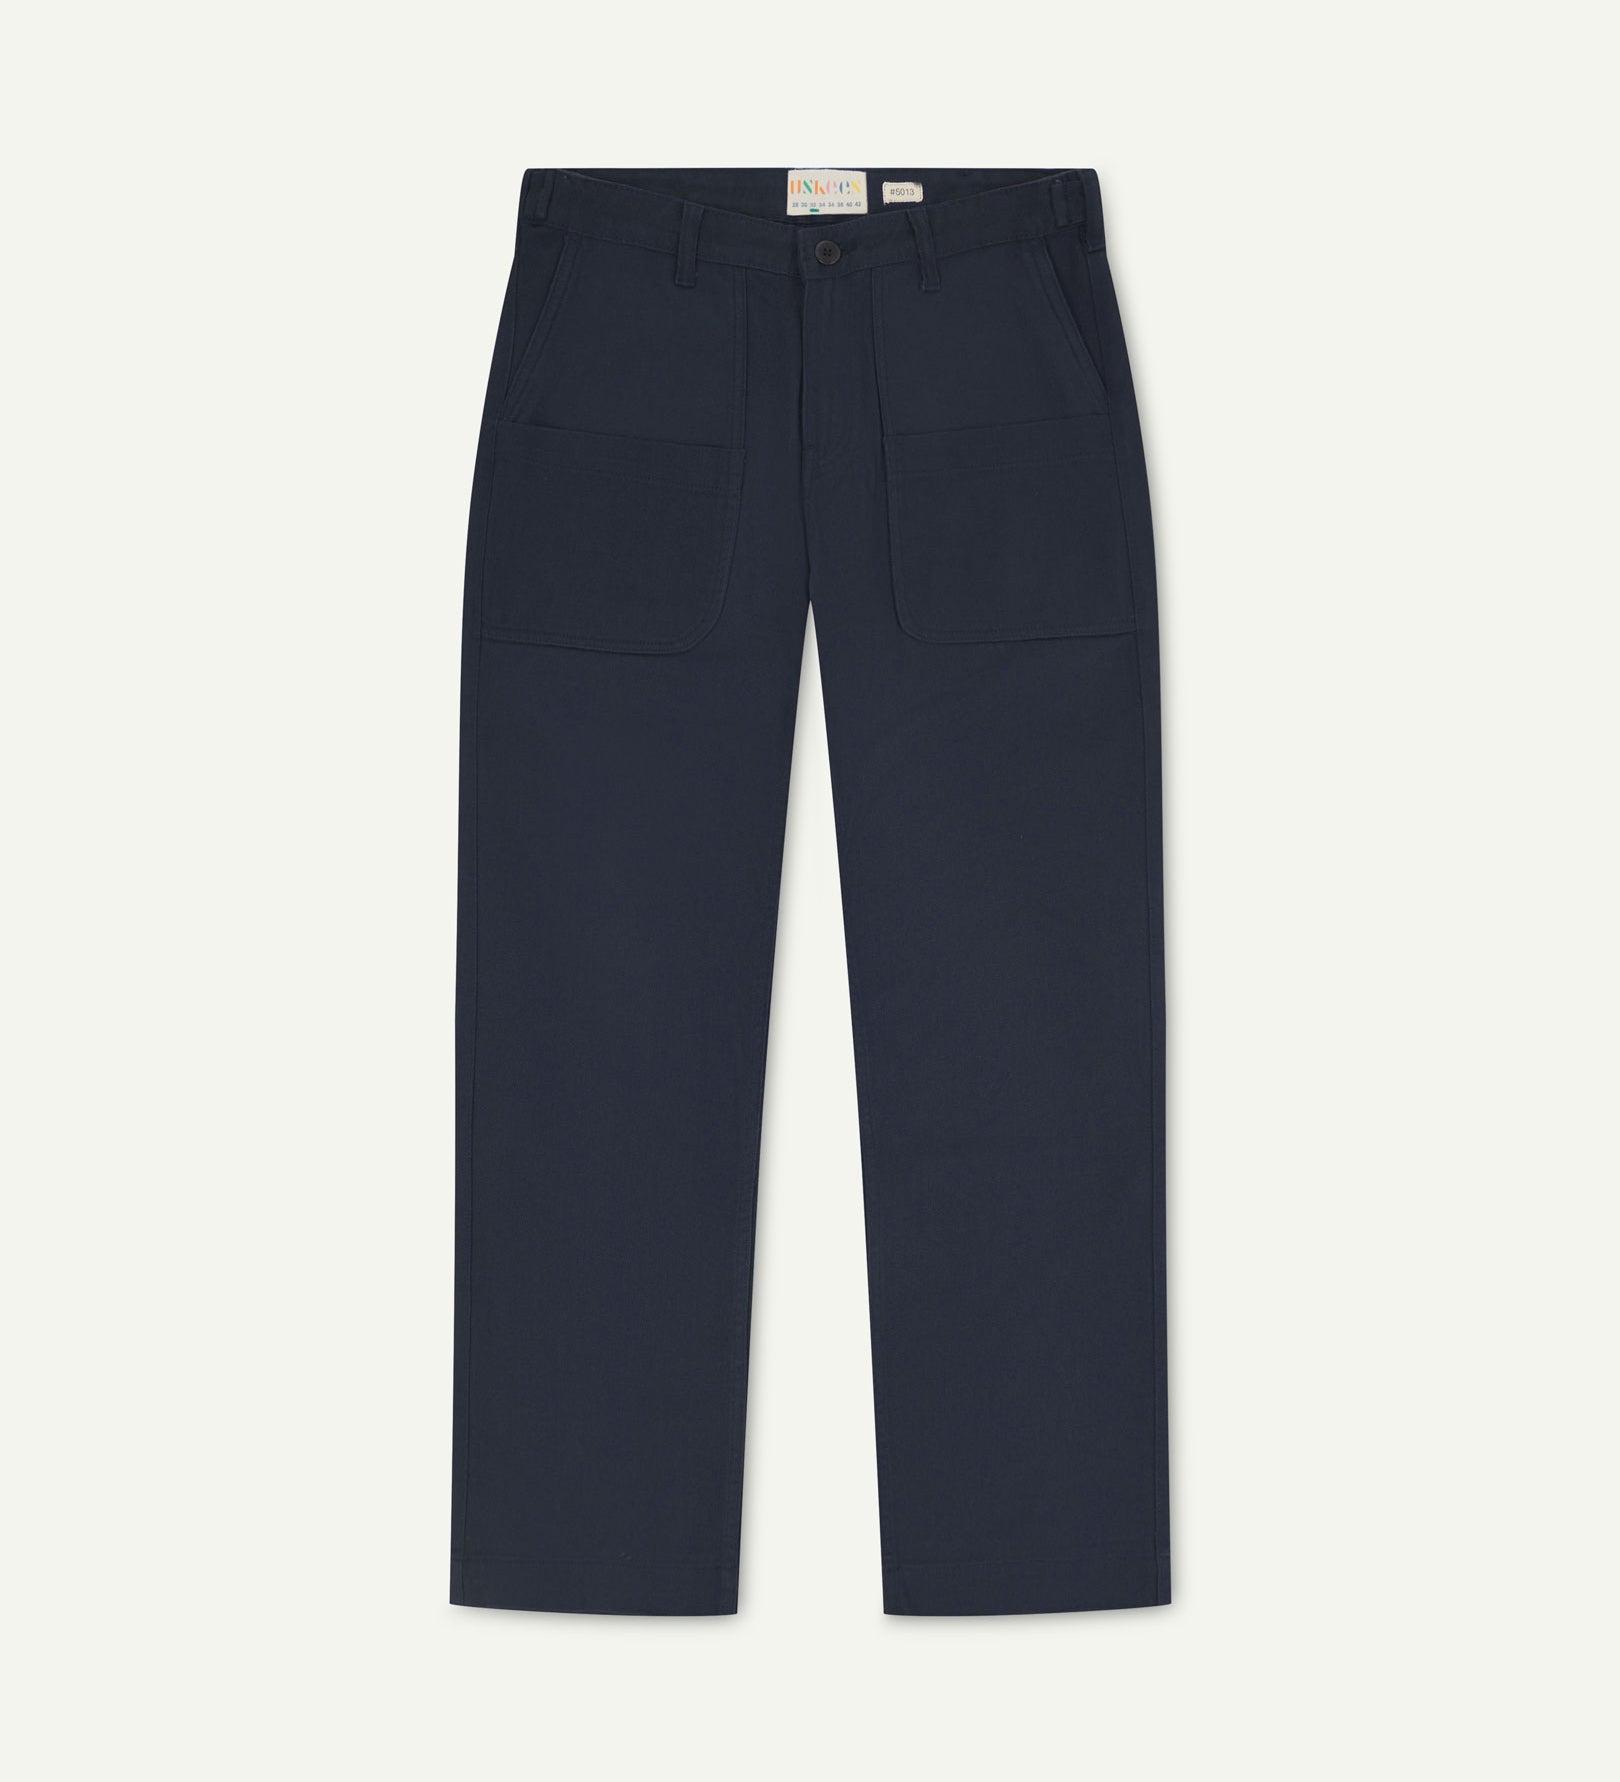 Front flat view of 5013 Uskees drill straight leg pants in dark blue, with focus on front pockets, layered pockets, belt loops and Uskees branding label.